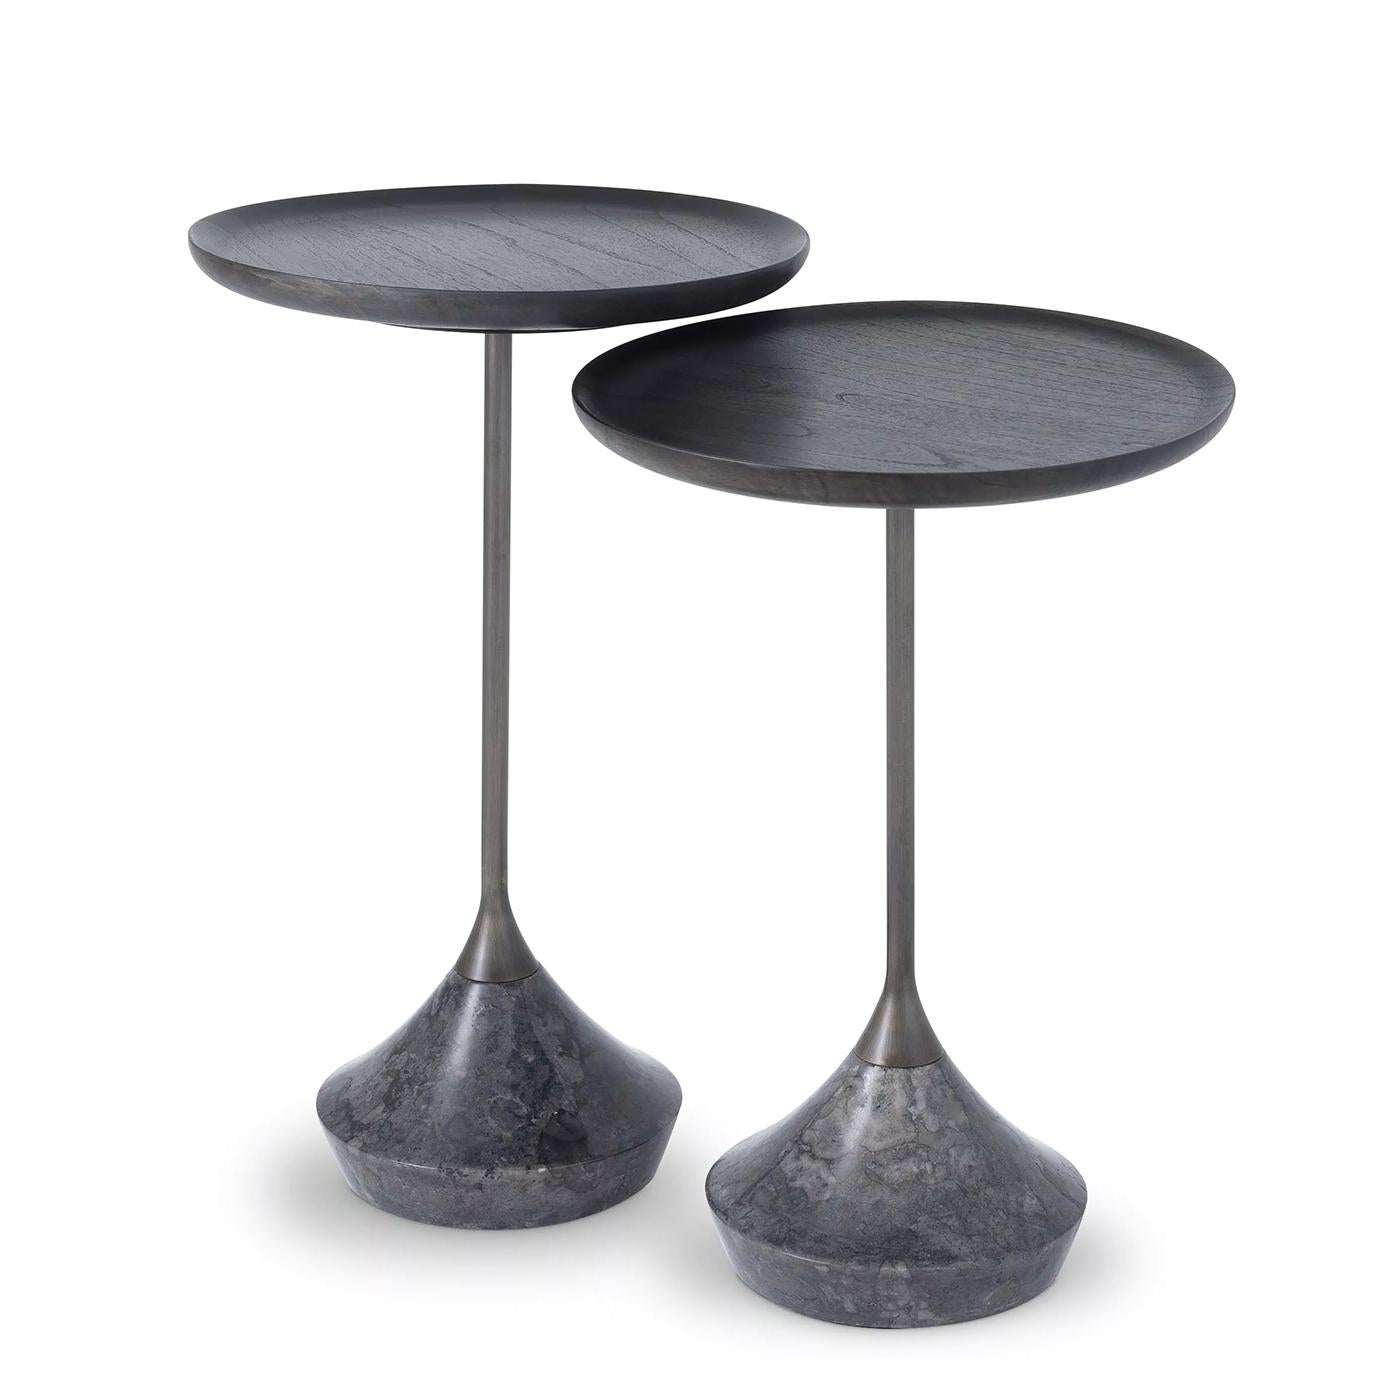 Side Table Perini Set of 2 with structures in stainless steel in bronzed finish,
with Mindi wood tops in blackened finish. Bases in polished dark grey marble.
Set of 2 side tables:
A/ Diameter 35cmxH56cm.
B/ Diameter 35cmxH50.5cm.
